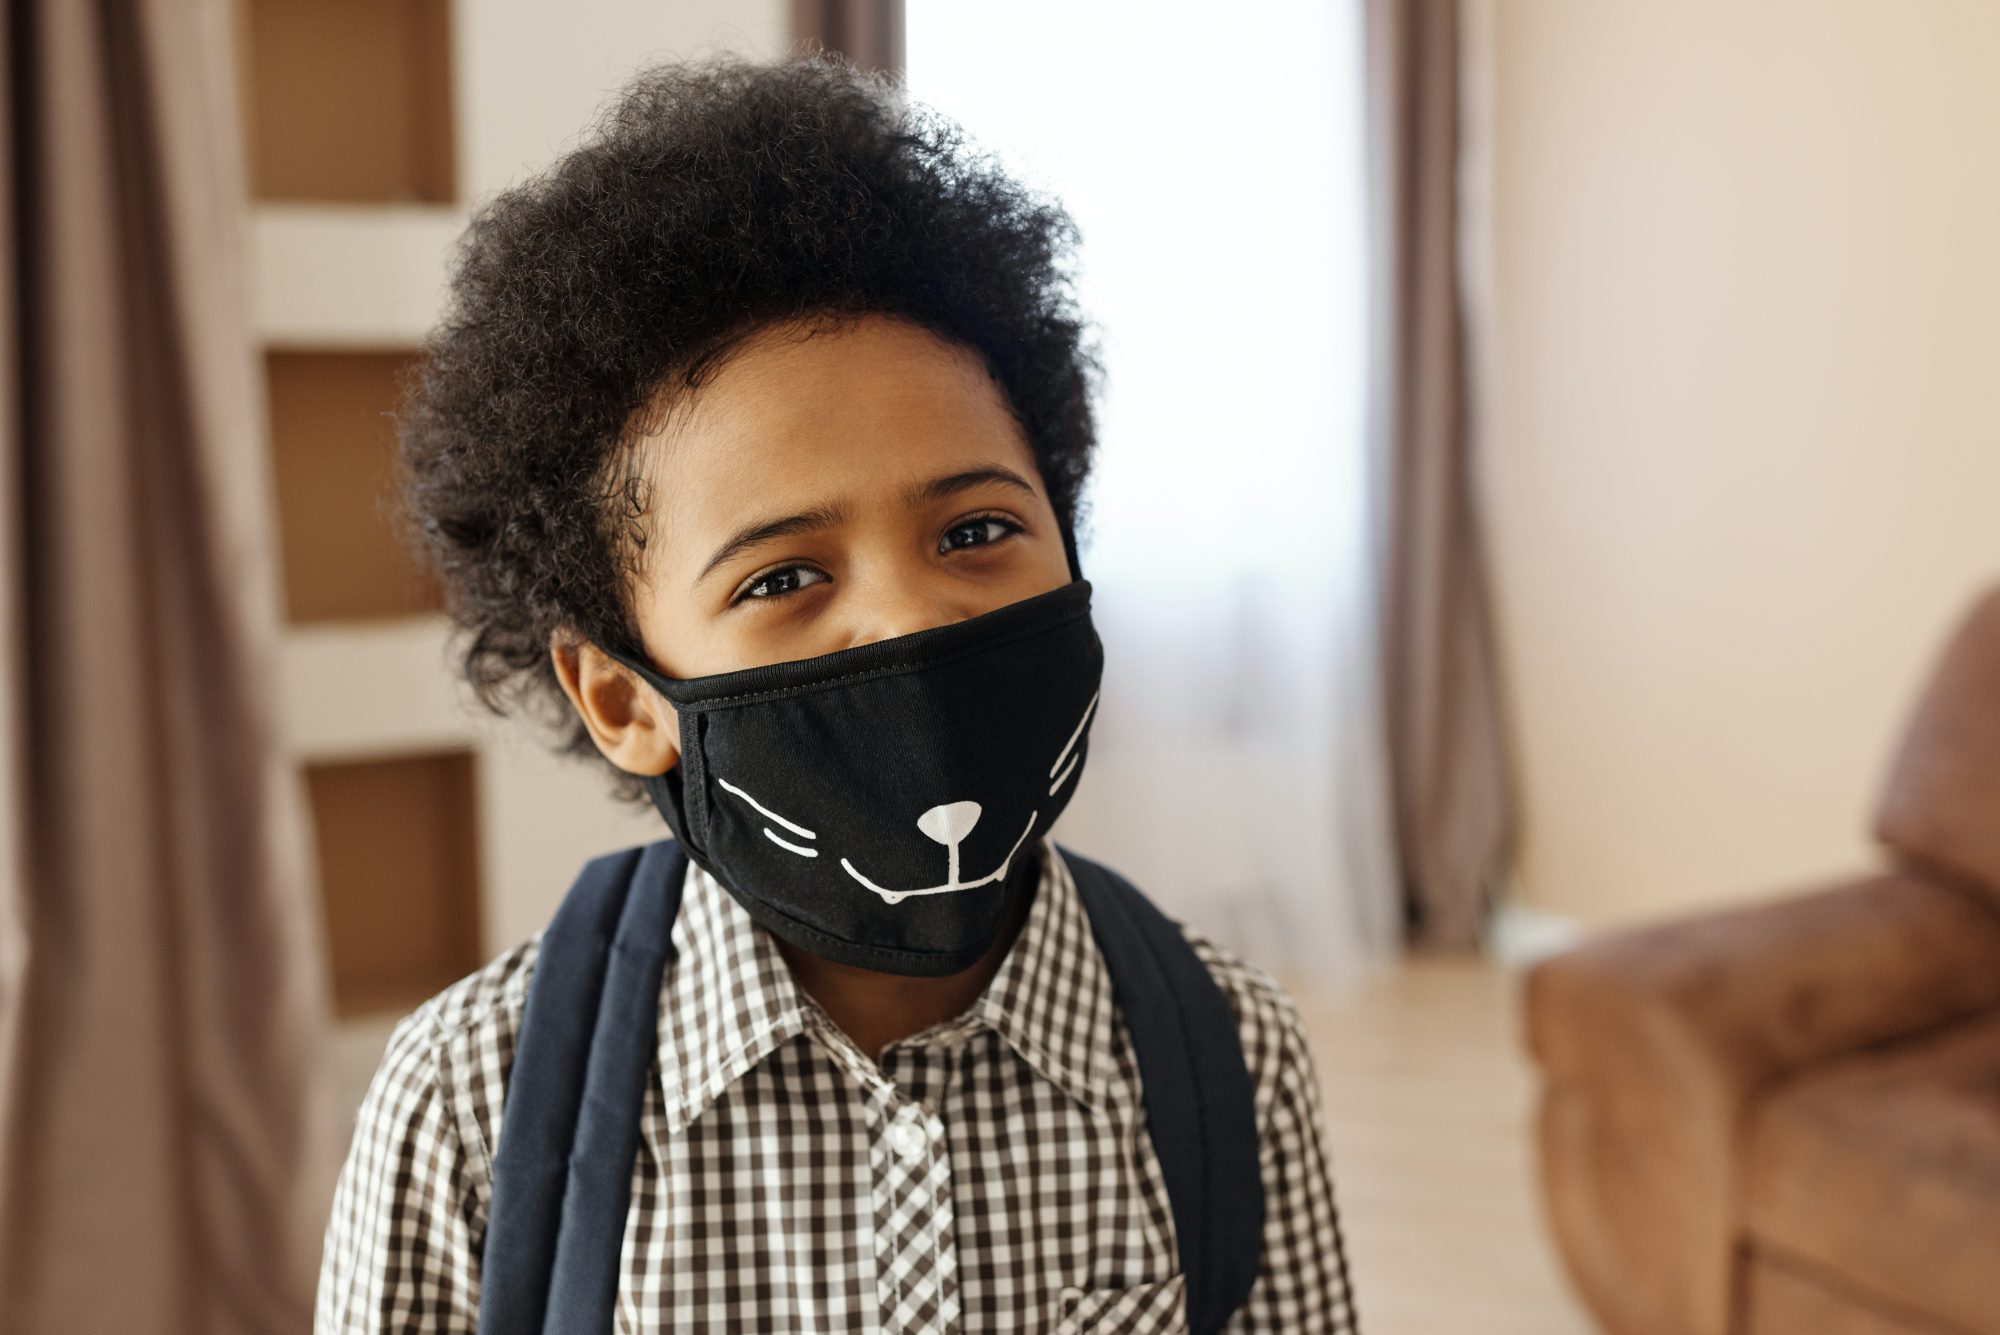 Young boy wearing a mask to protect against coronavirus and emerging Multisystem Inflammatory Syndrome in Children